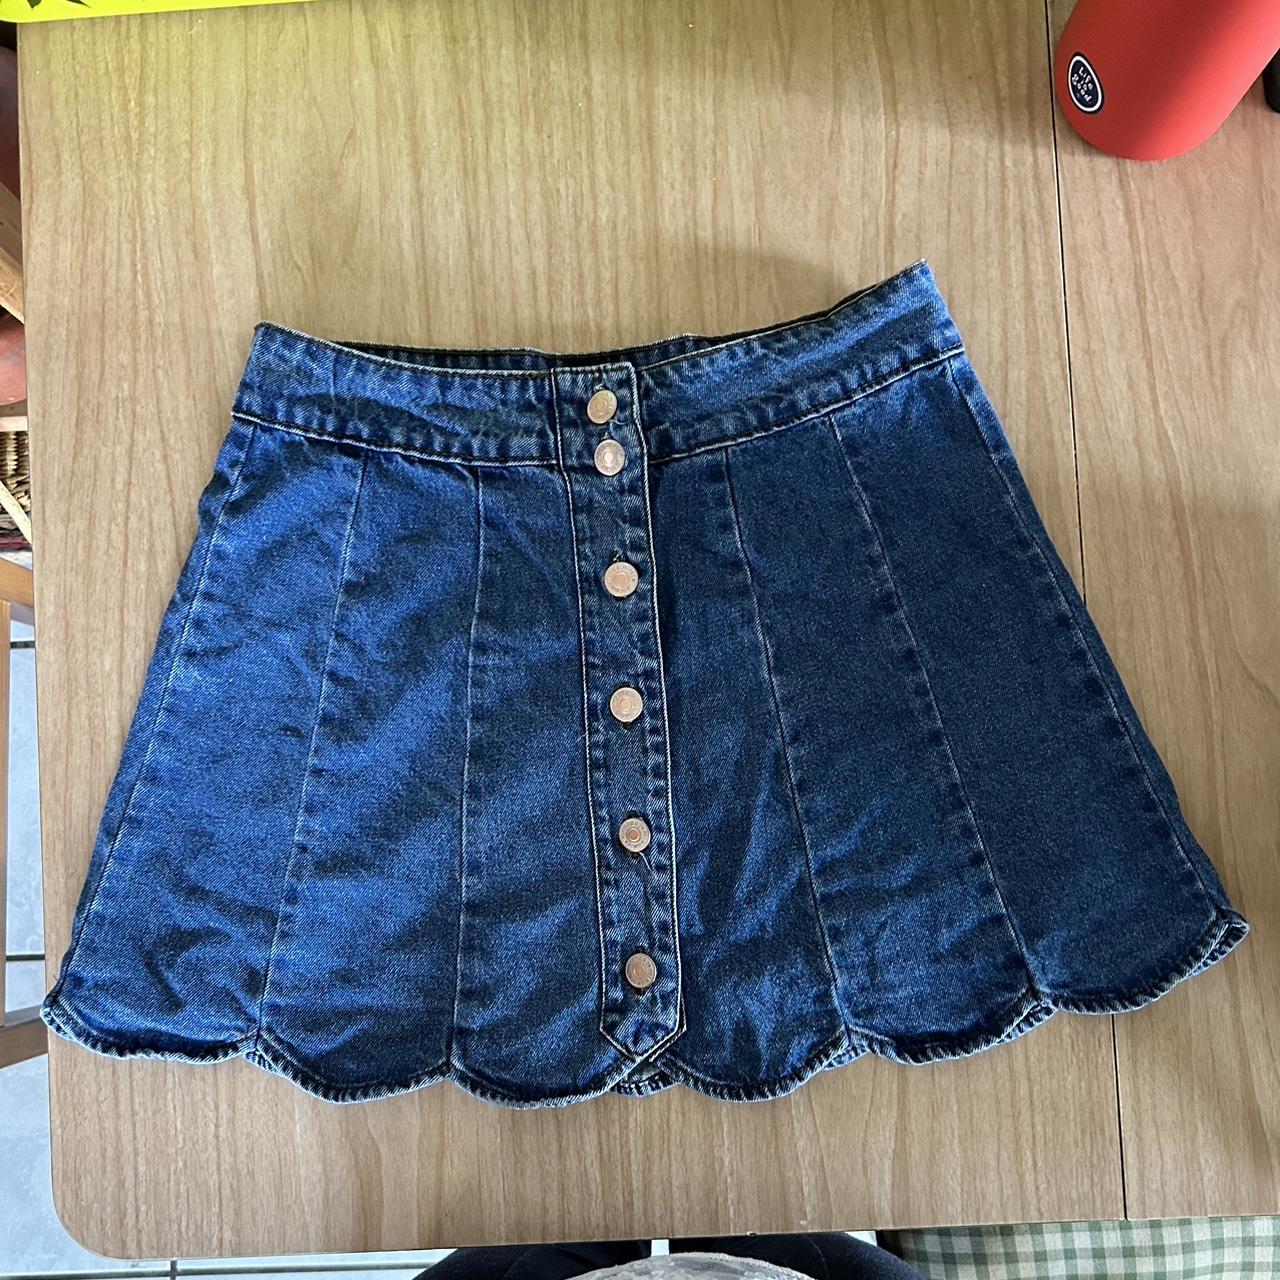 Jean pleated skirt ! - can fit from size small to... - Depop